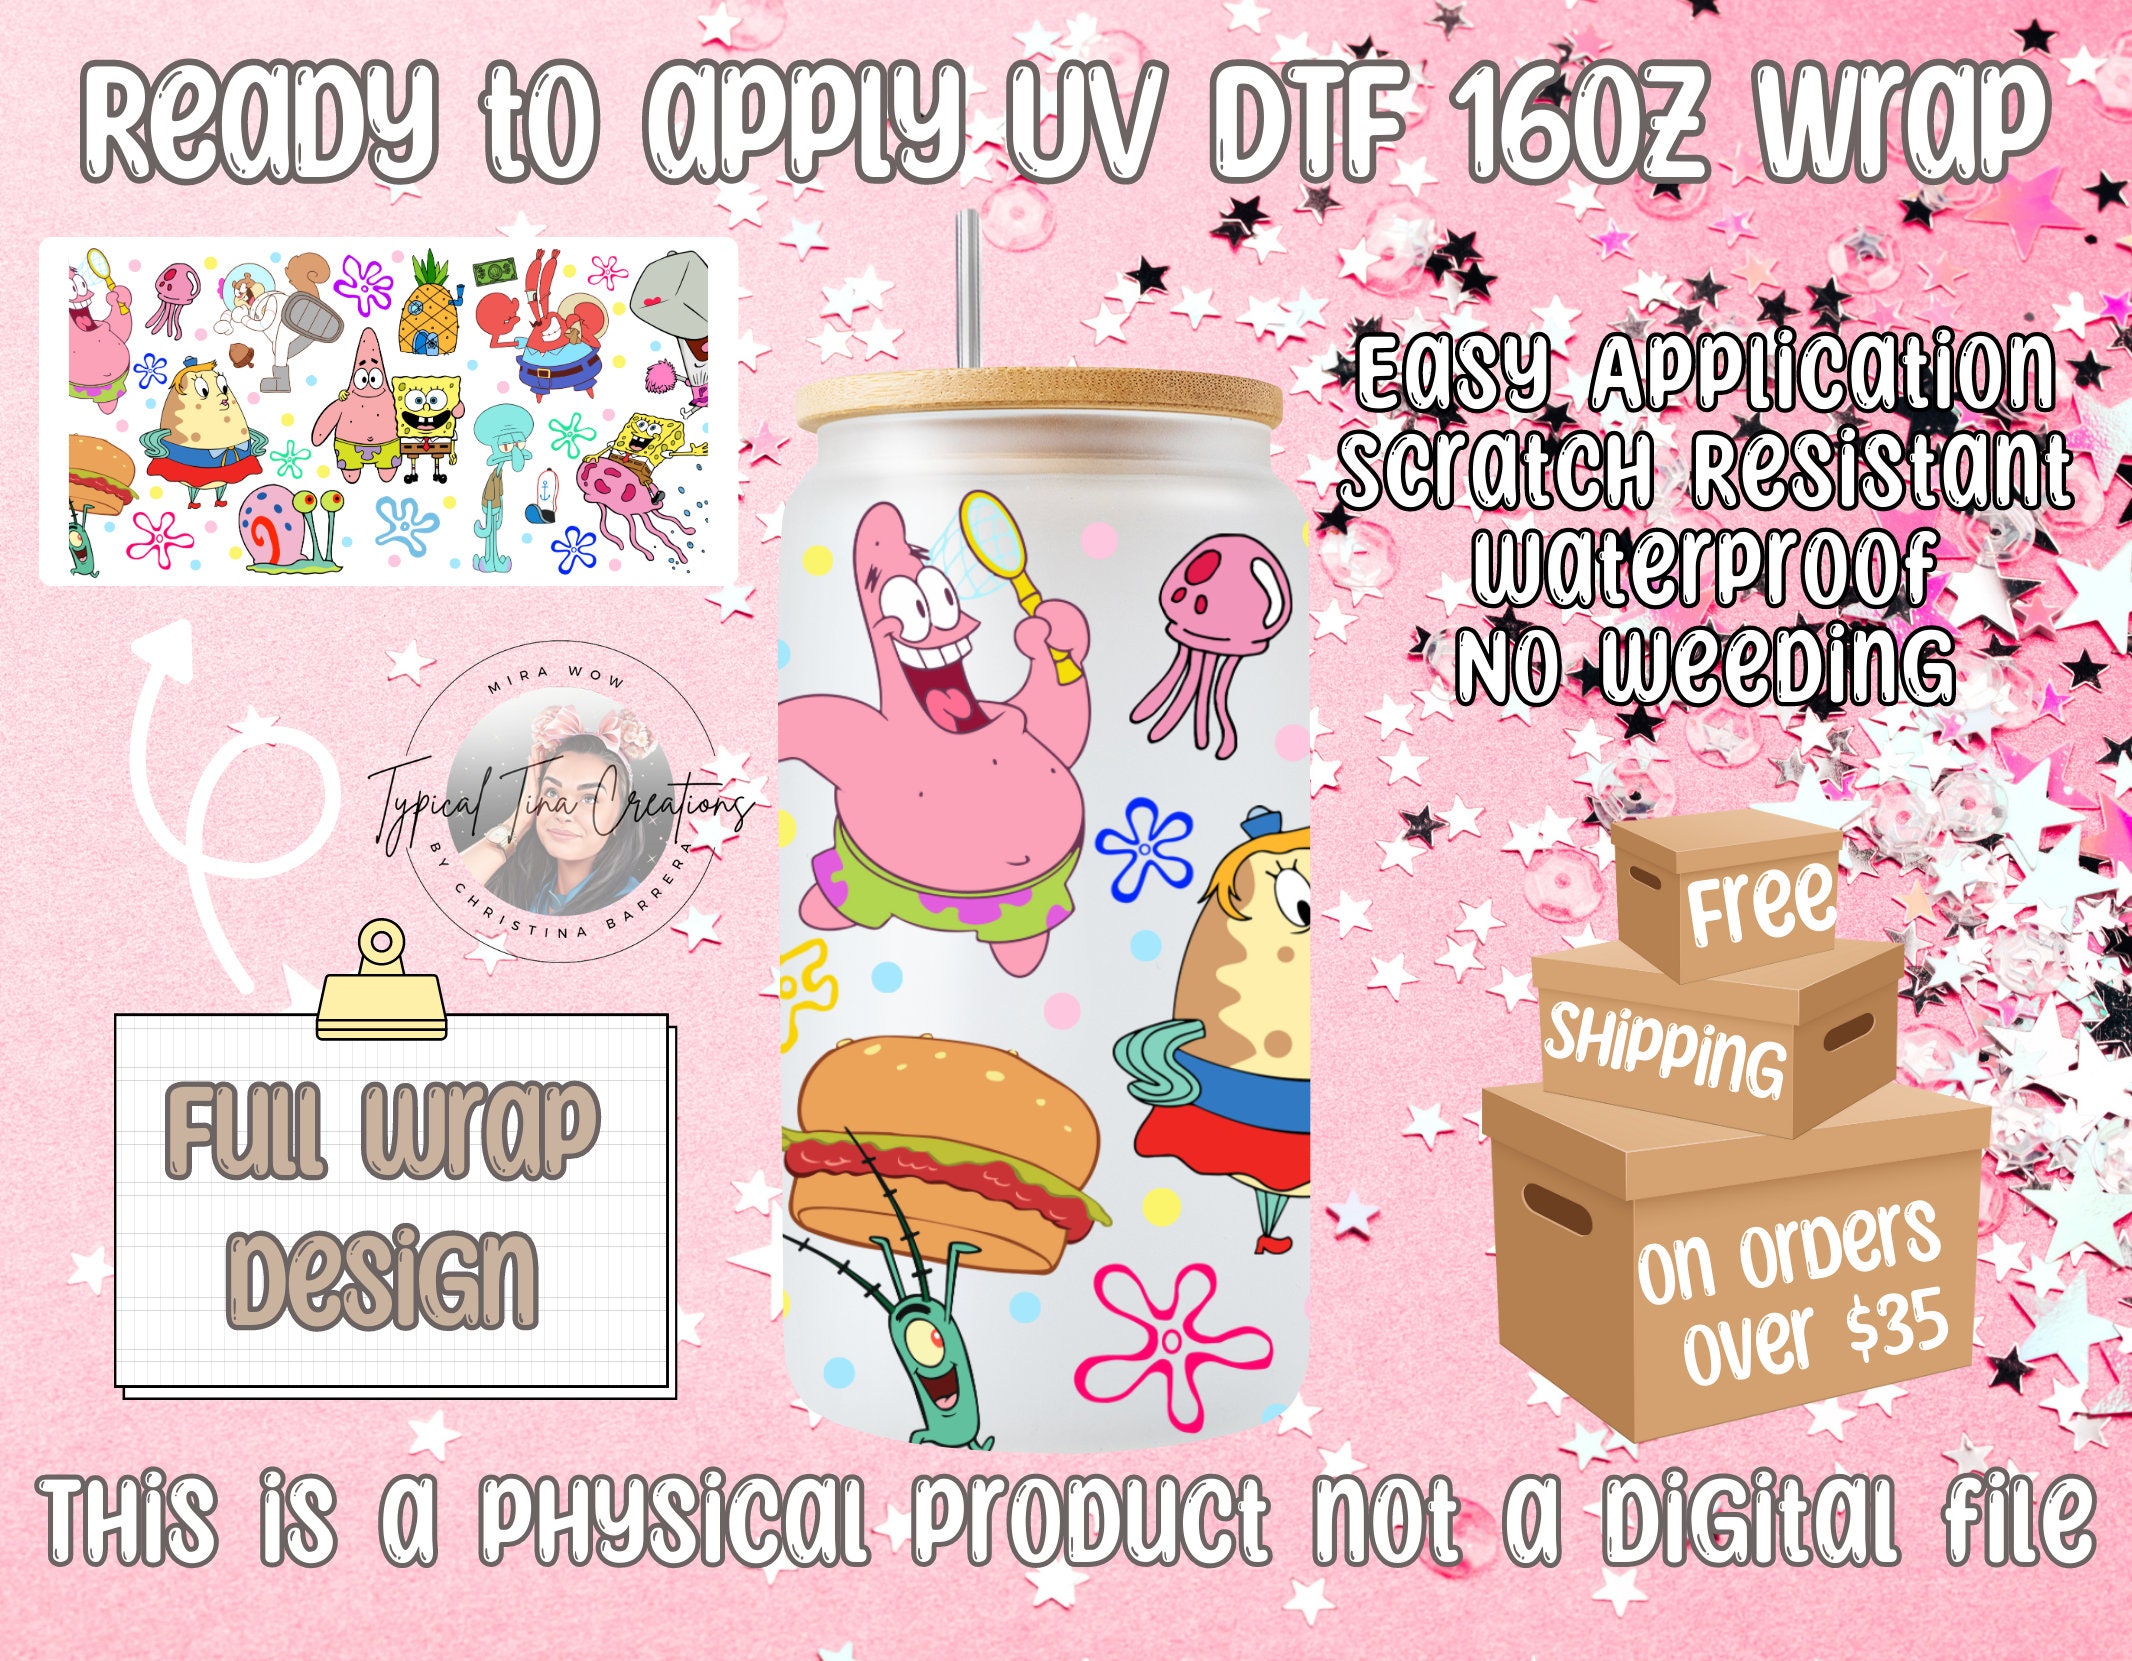 Presale Ships Week of 1/22 UVDTF Cup Wraps Ready to Apply High